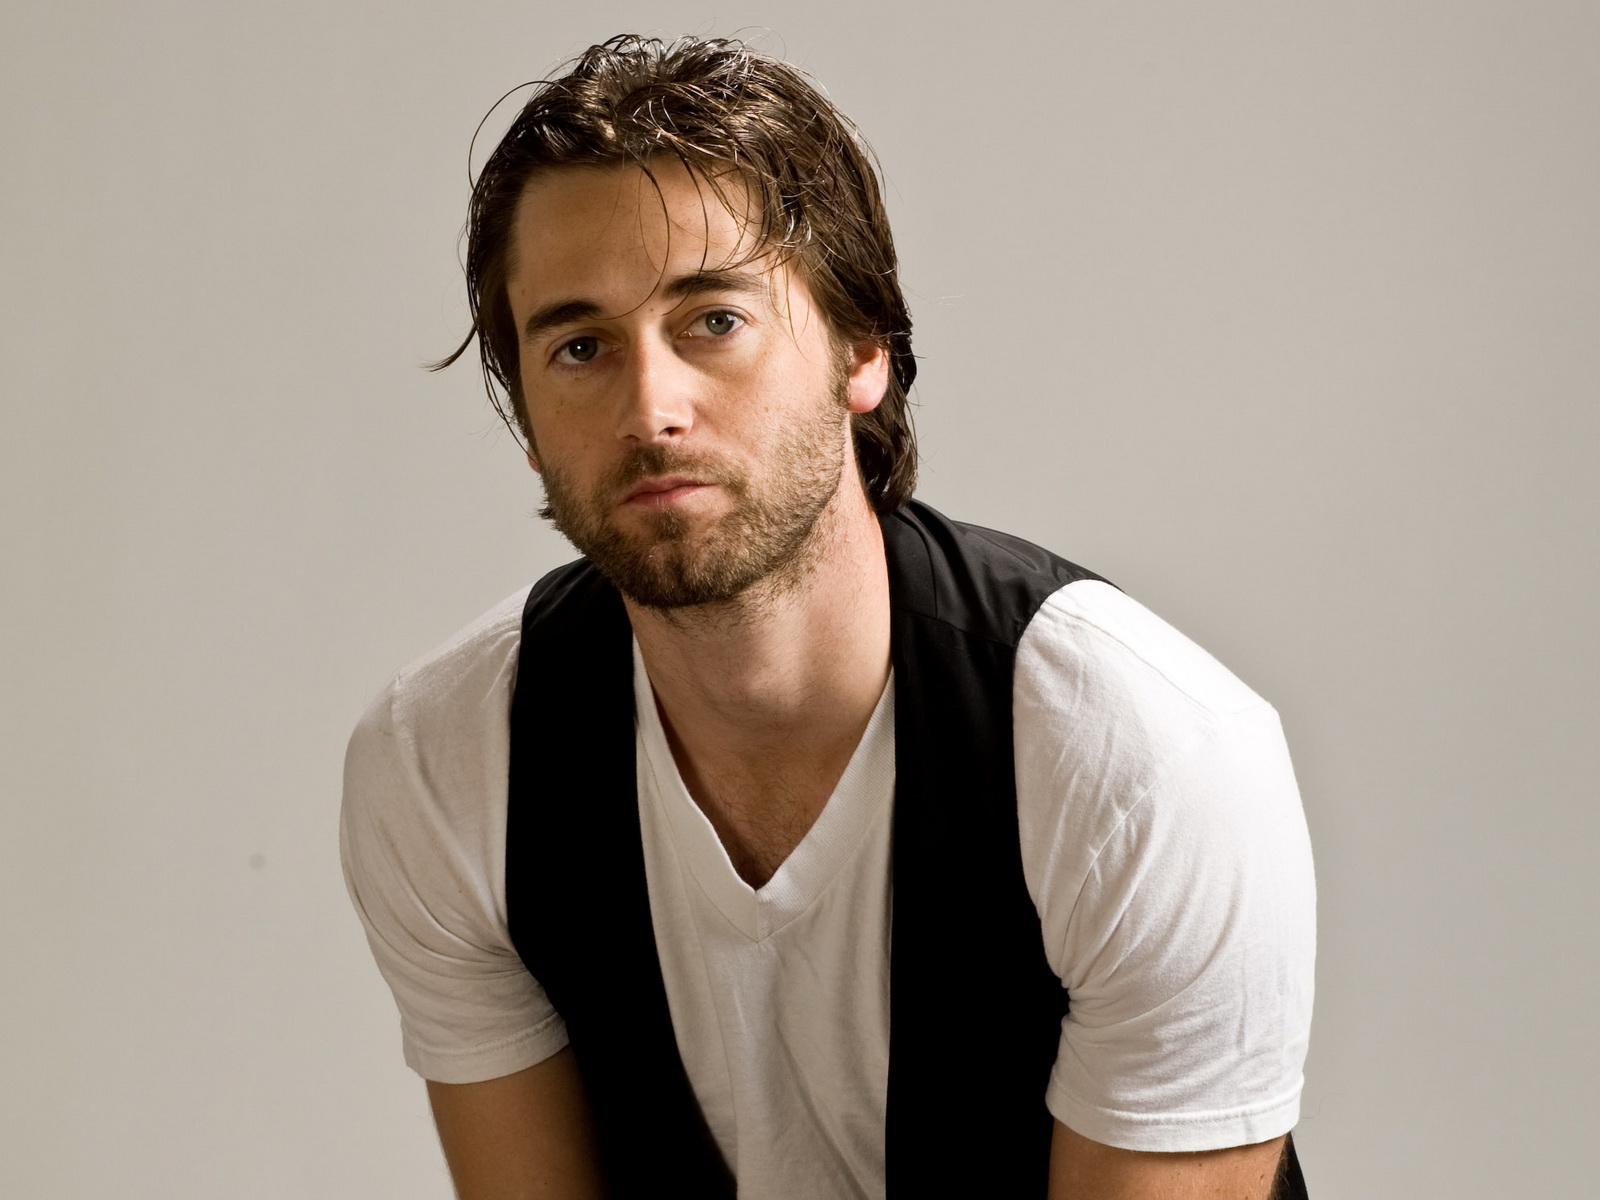 Ryan Eggold Pictures